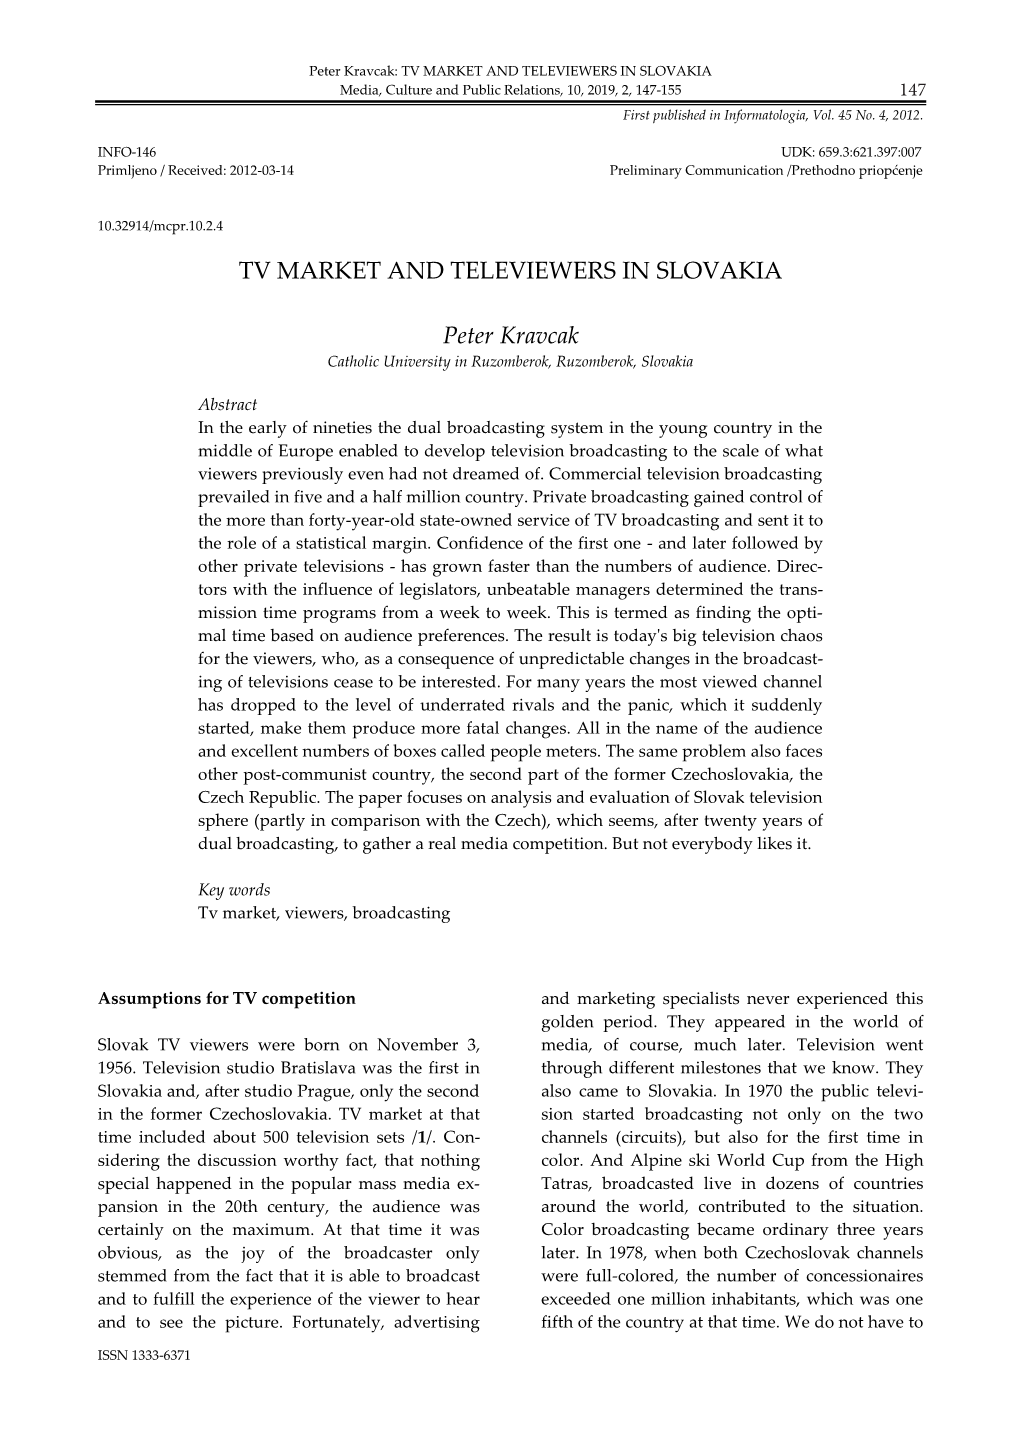 TV MARKET and TELEVIEWERS in SLOVAKIA Peter Kravcak